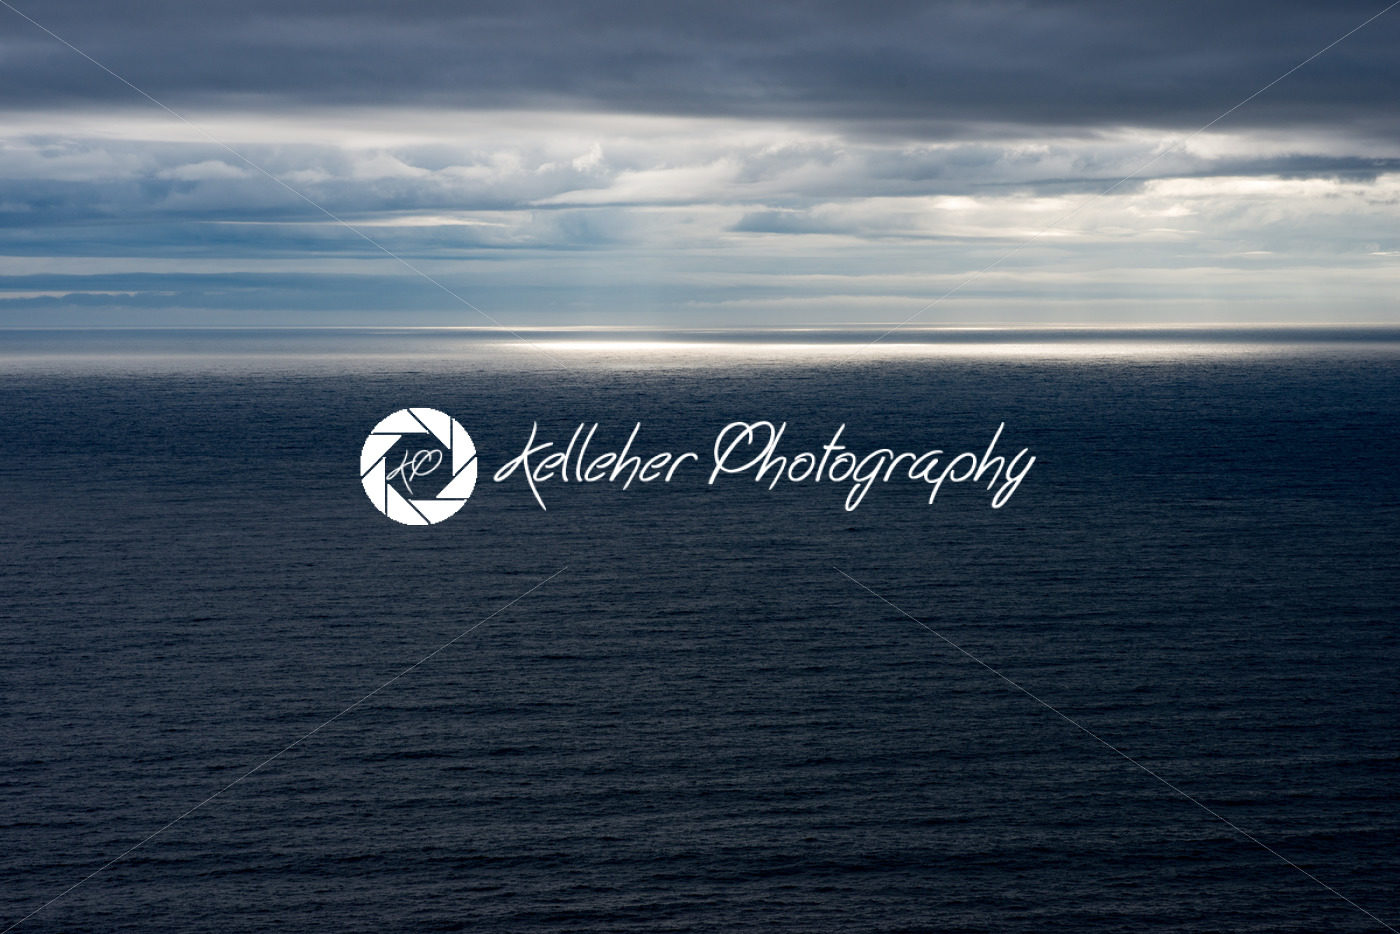 Atlantic Ocean from the Cliffs of Moher Tourist Attraction in Ireland - Kelleher Photography Store